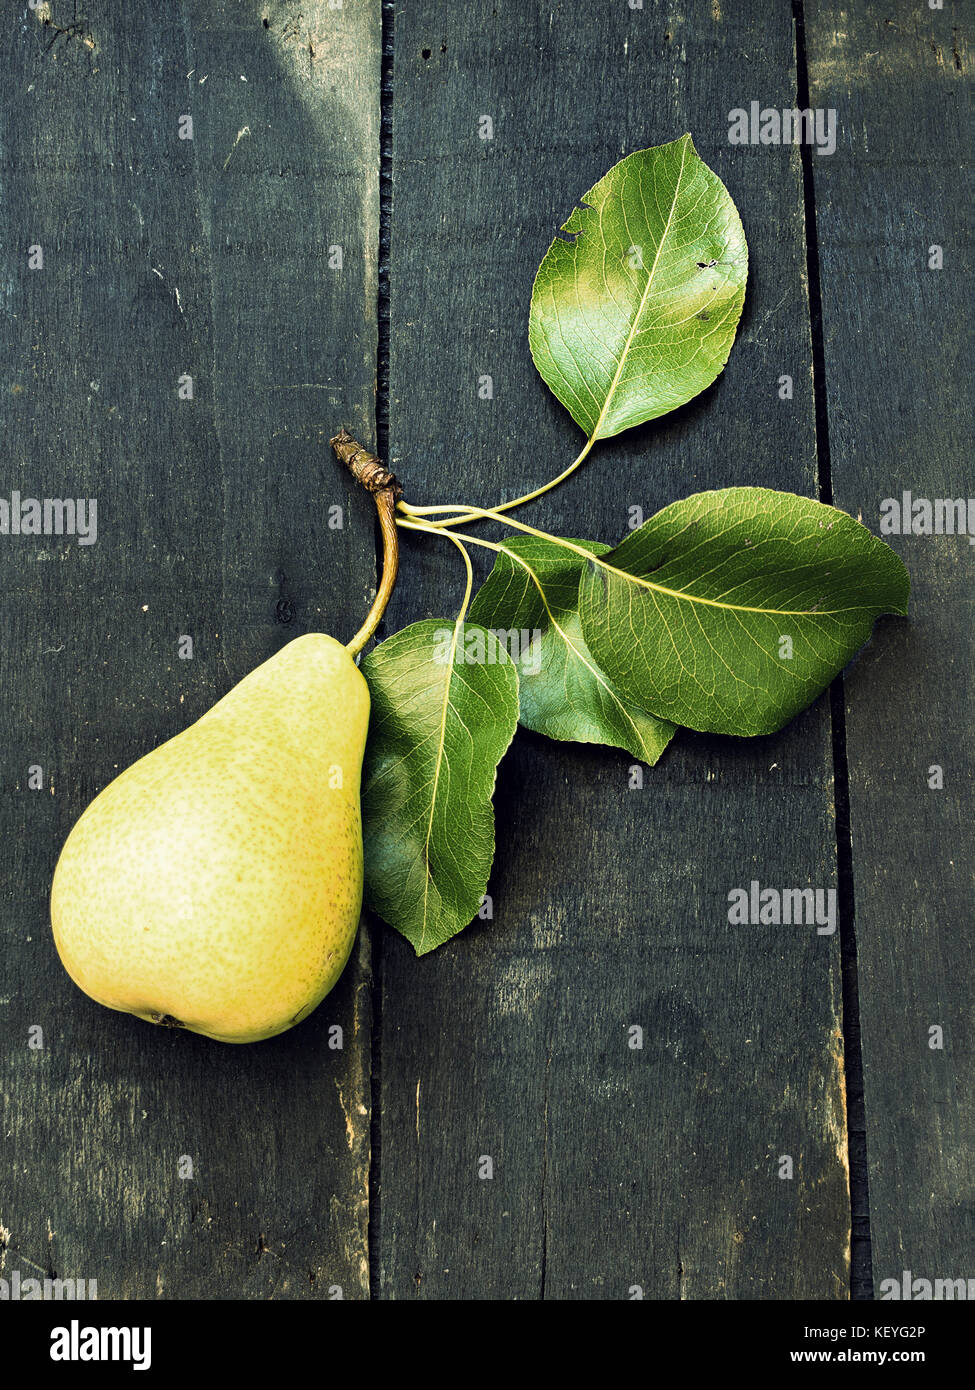 Just picked a pear on a dark wooden surface - vintage look Stock Photo